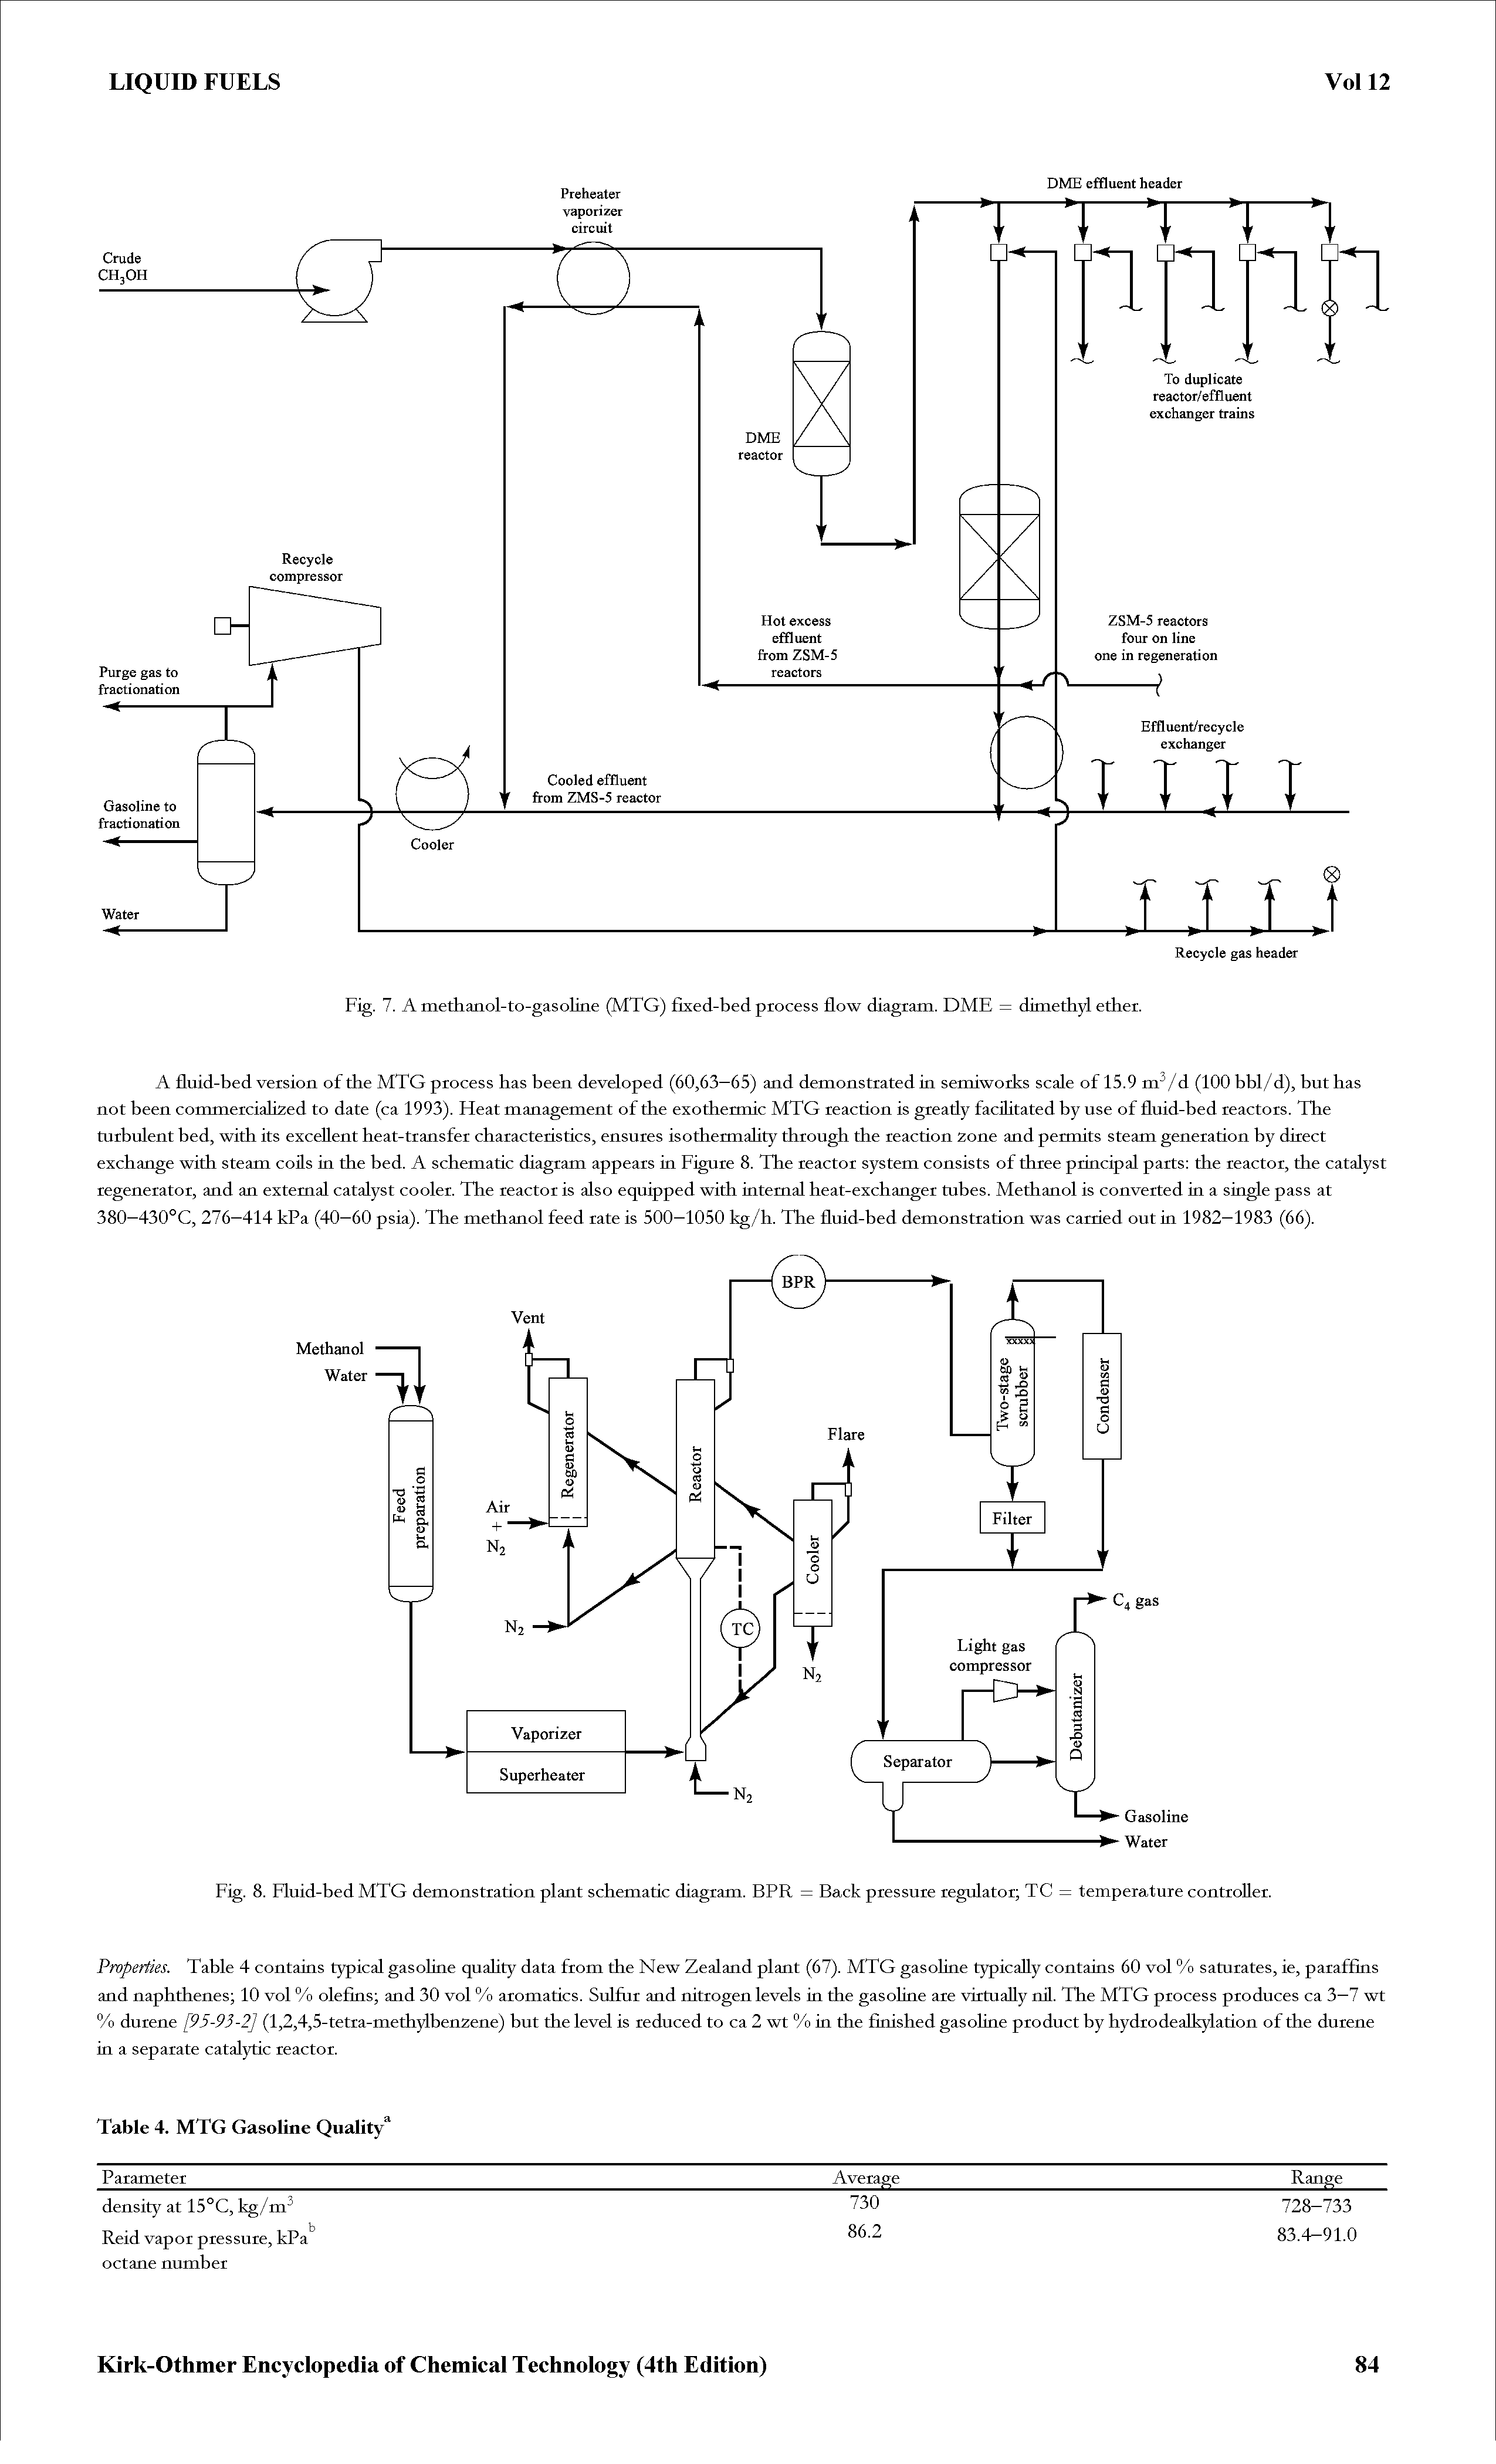 Fig. 7. A methanol-to-gasoline (MTG) fixed-bed process flow diagram. DME = dimethyl ether.